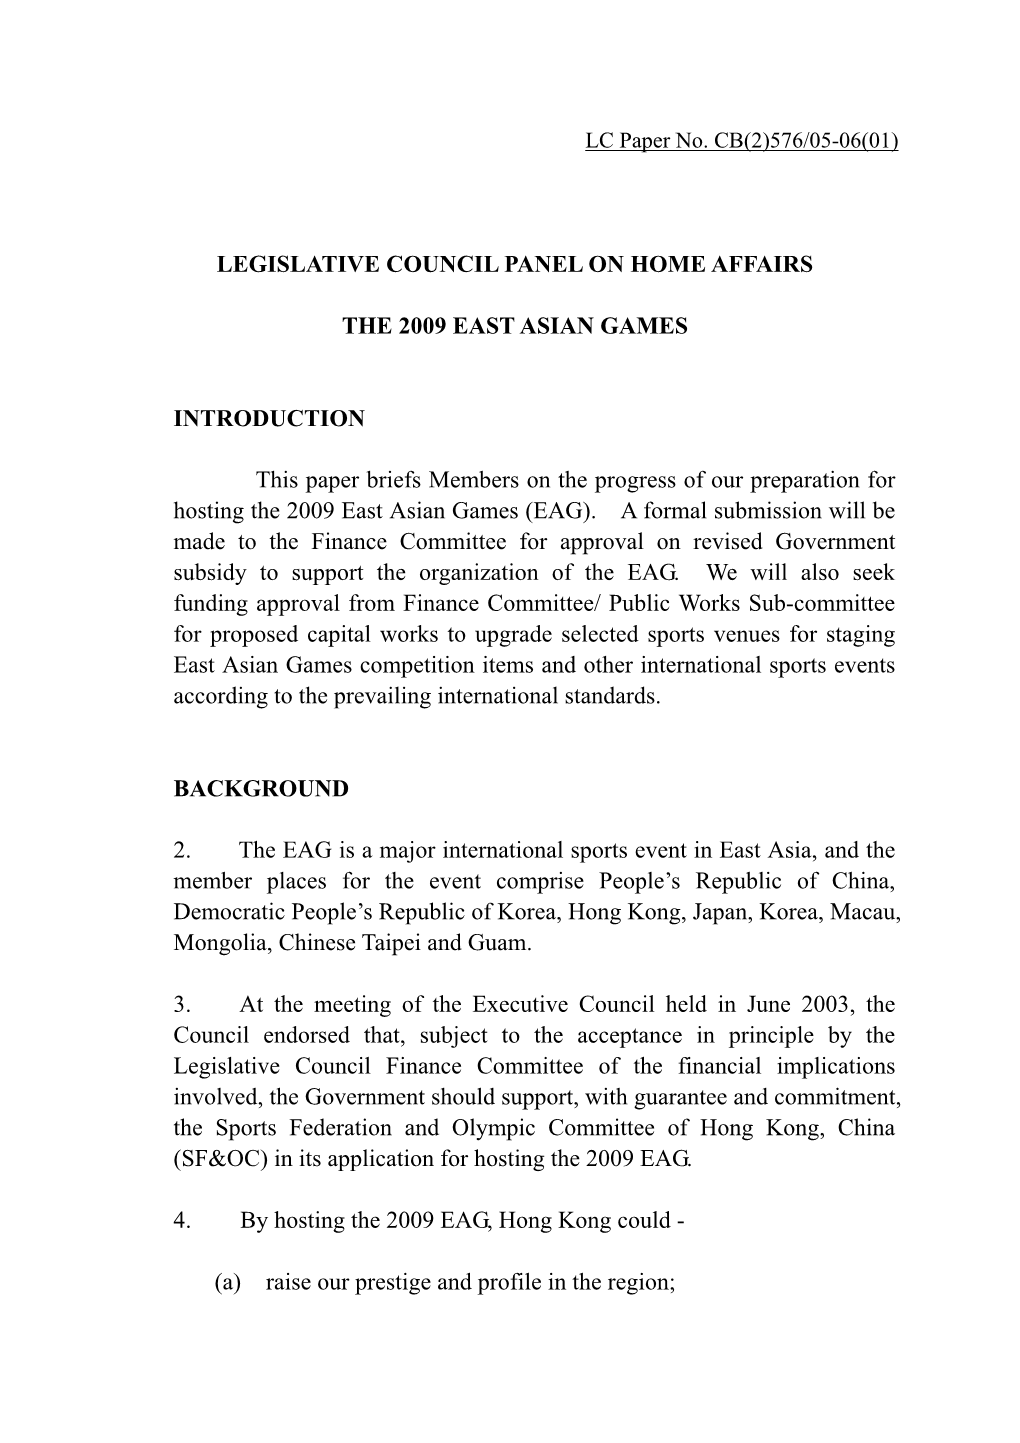 LEGISLATIVE COUNCIL PANEL on HOME AFFAIRS the 2009 EAST ASIAN GAMES INTRODUCTION This Paper Briefs Members on the Progress of Ou